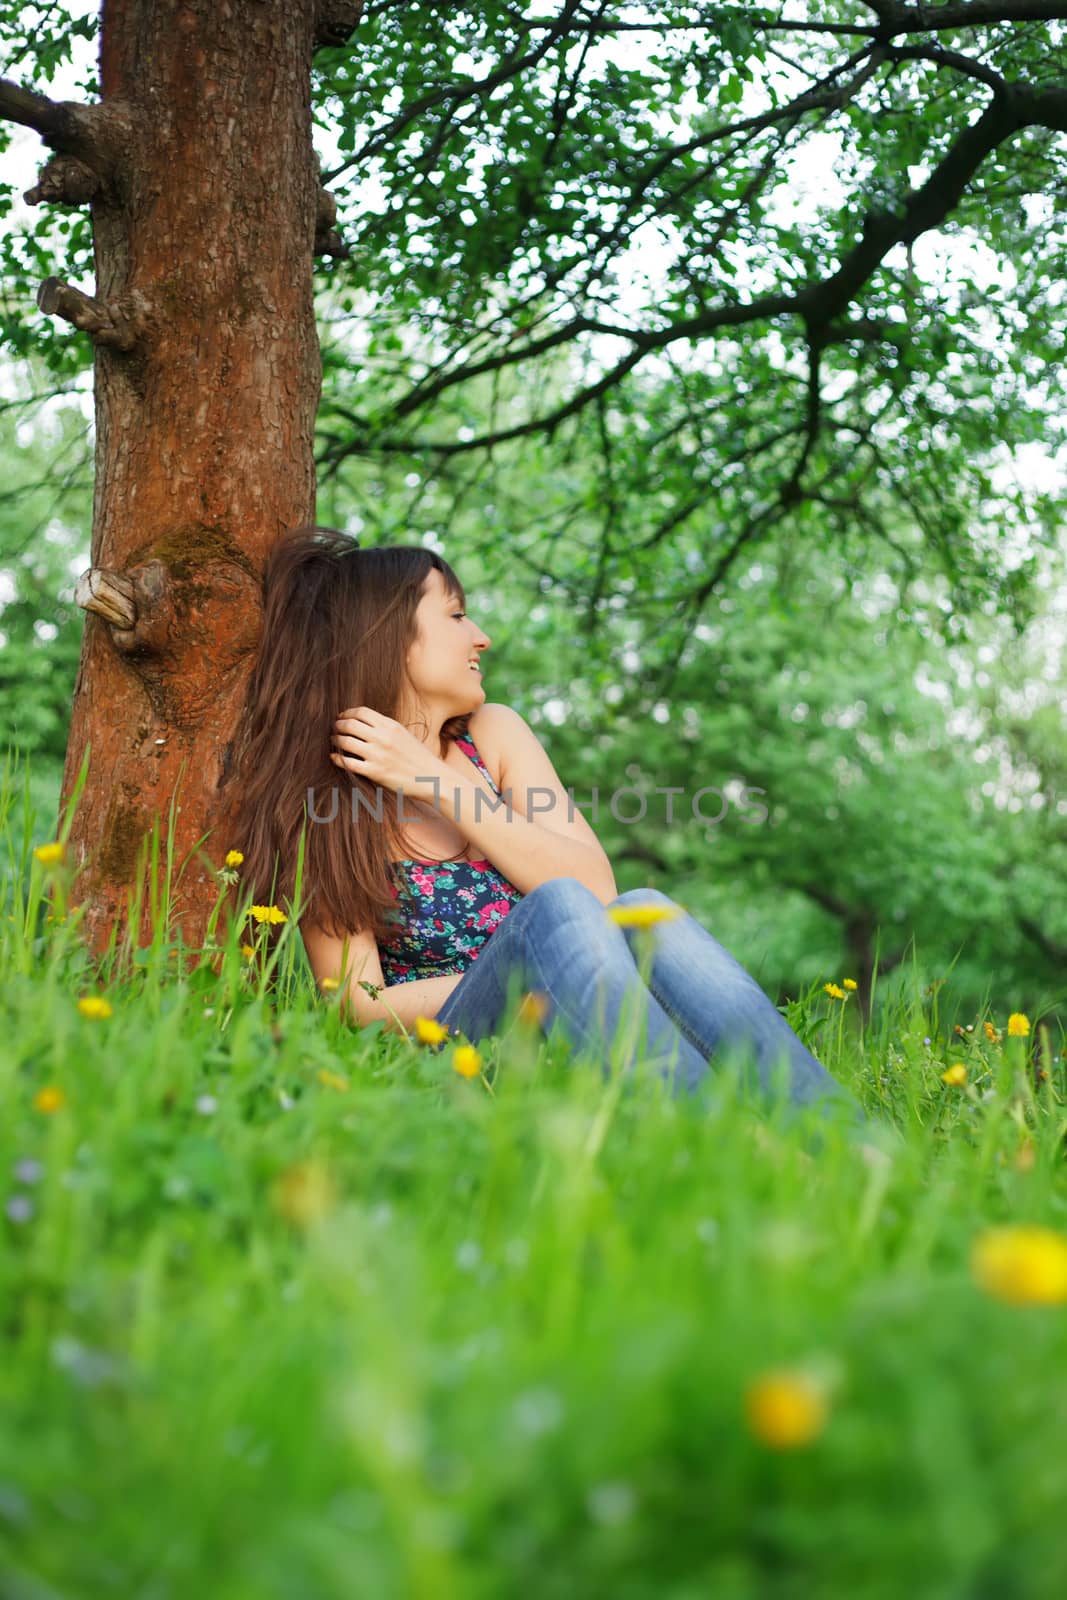 Teenage girl is resting in the park, sitting on the grass. Enjoying the nature.